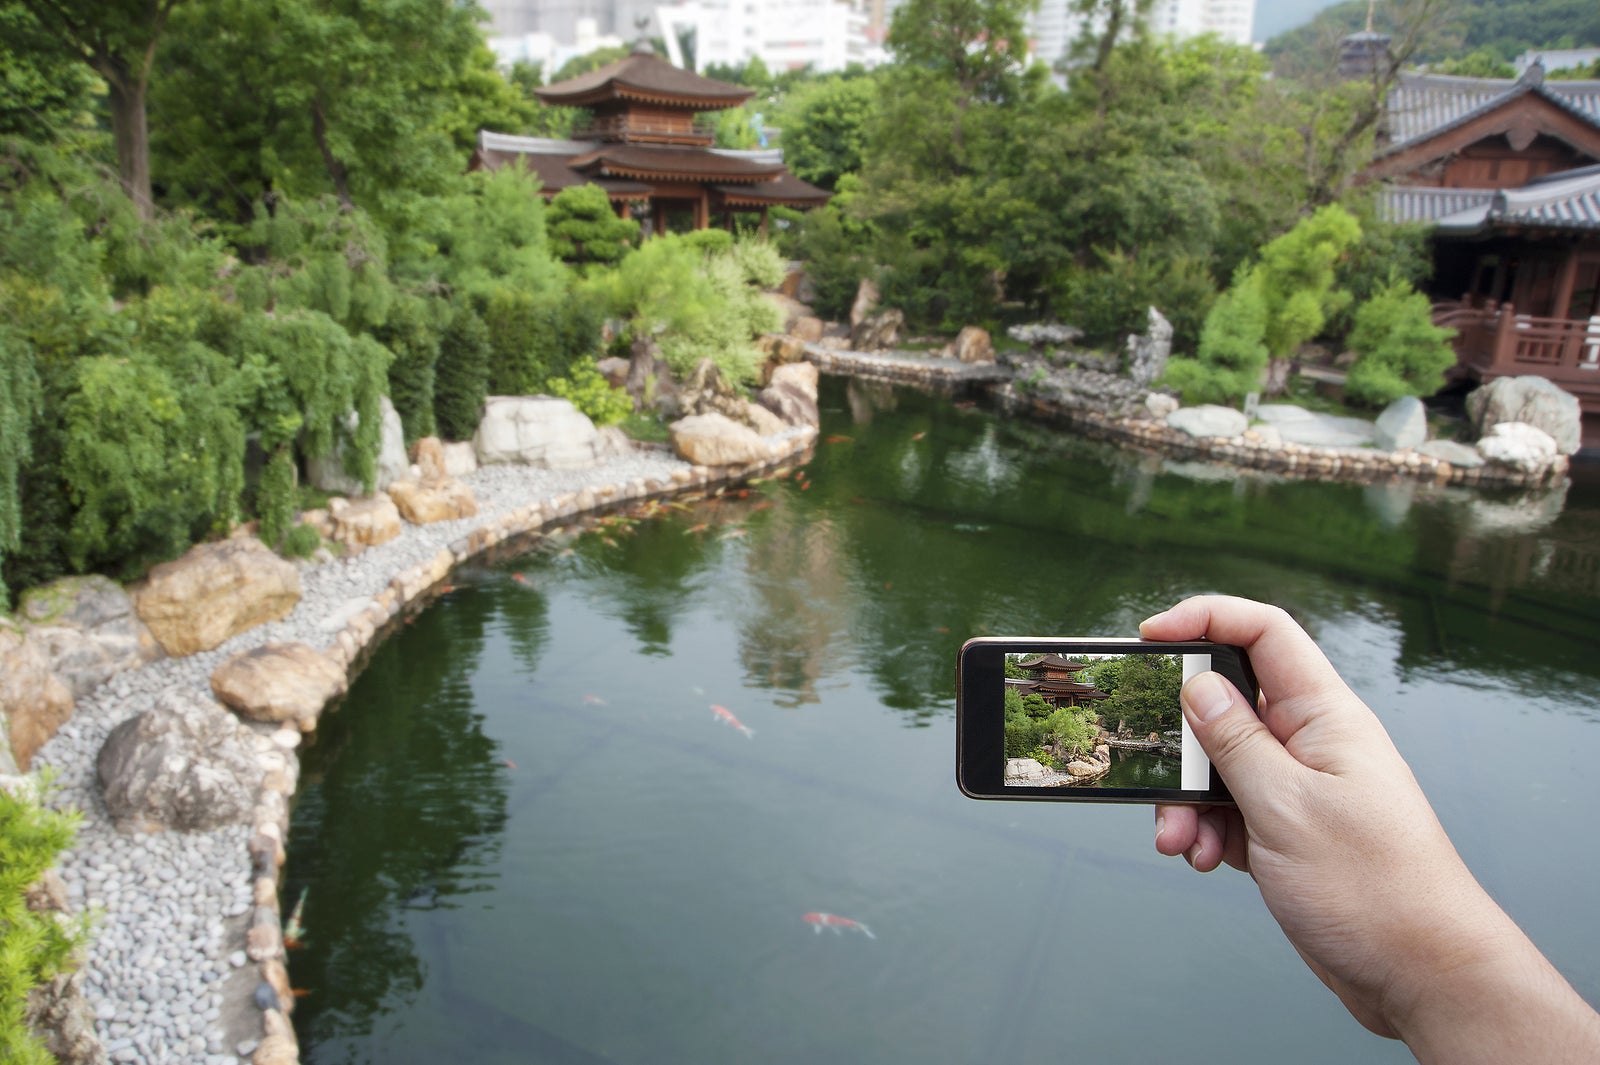 Taking Pictures with smartphone in Hong Kong